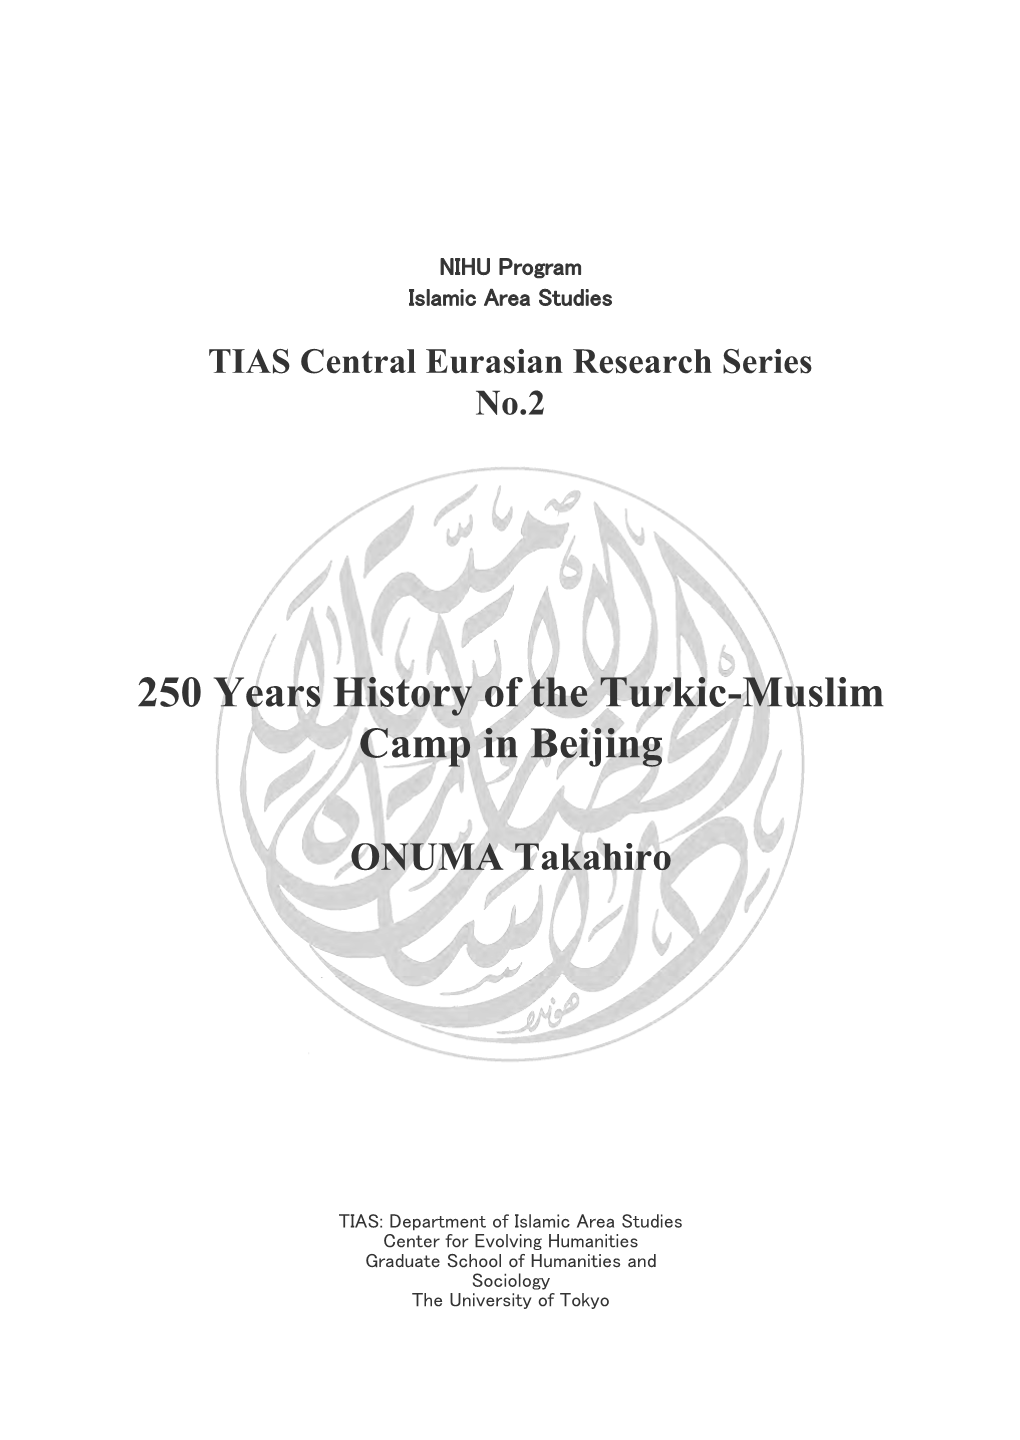 250 Years History of the Turkic-Muslim Camp in Beijing